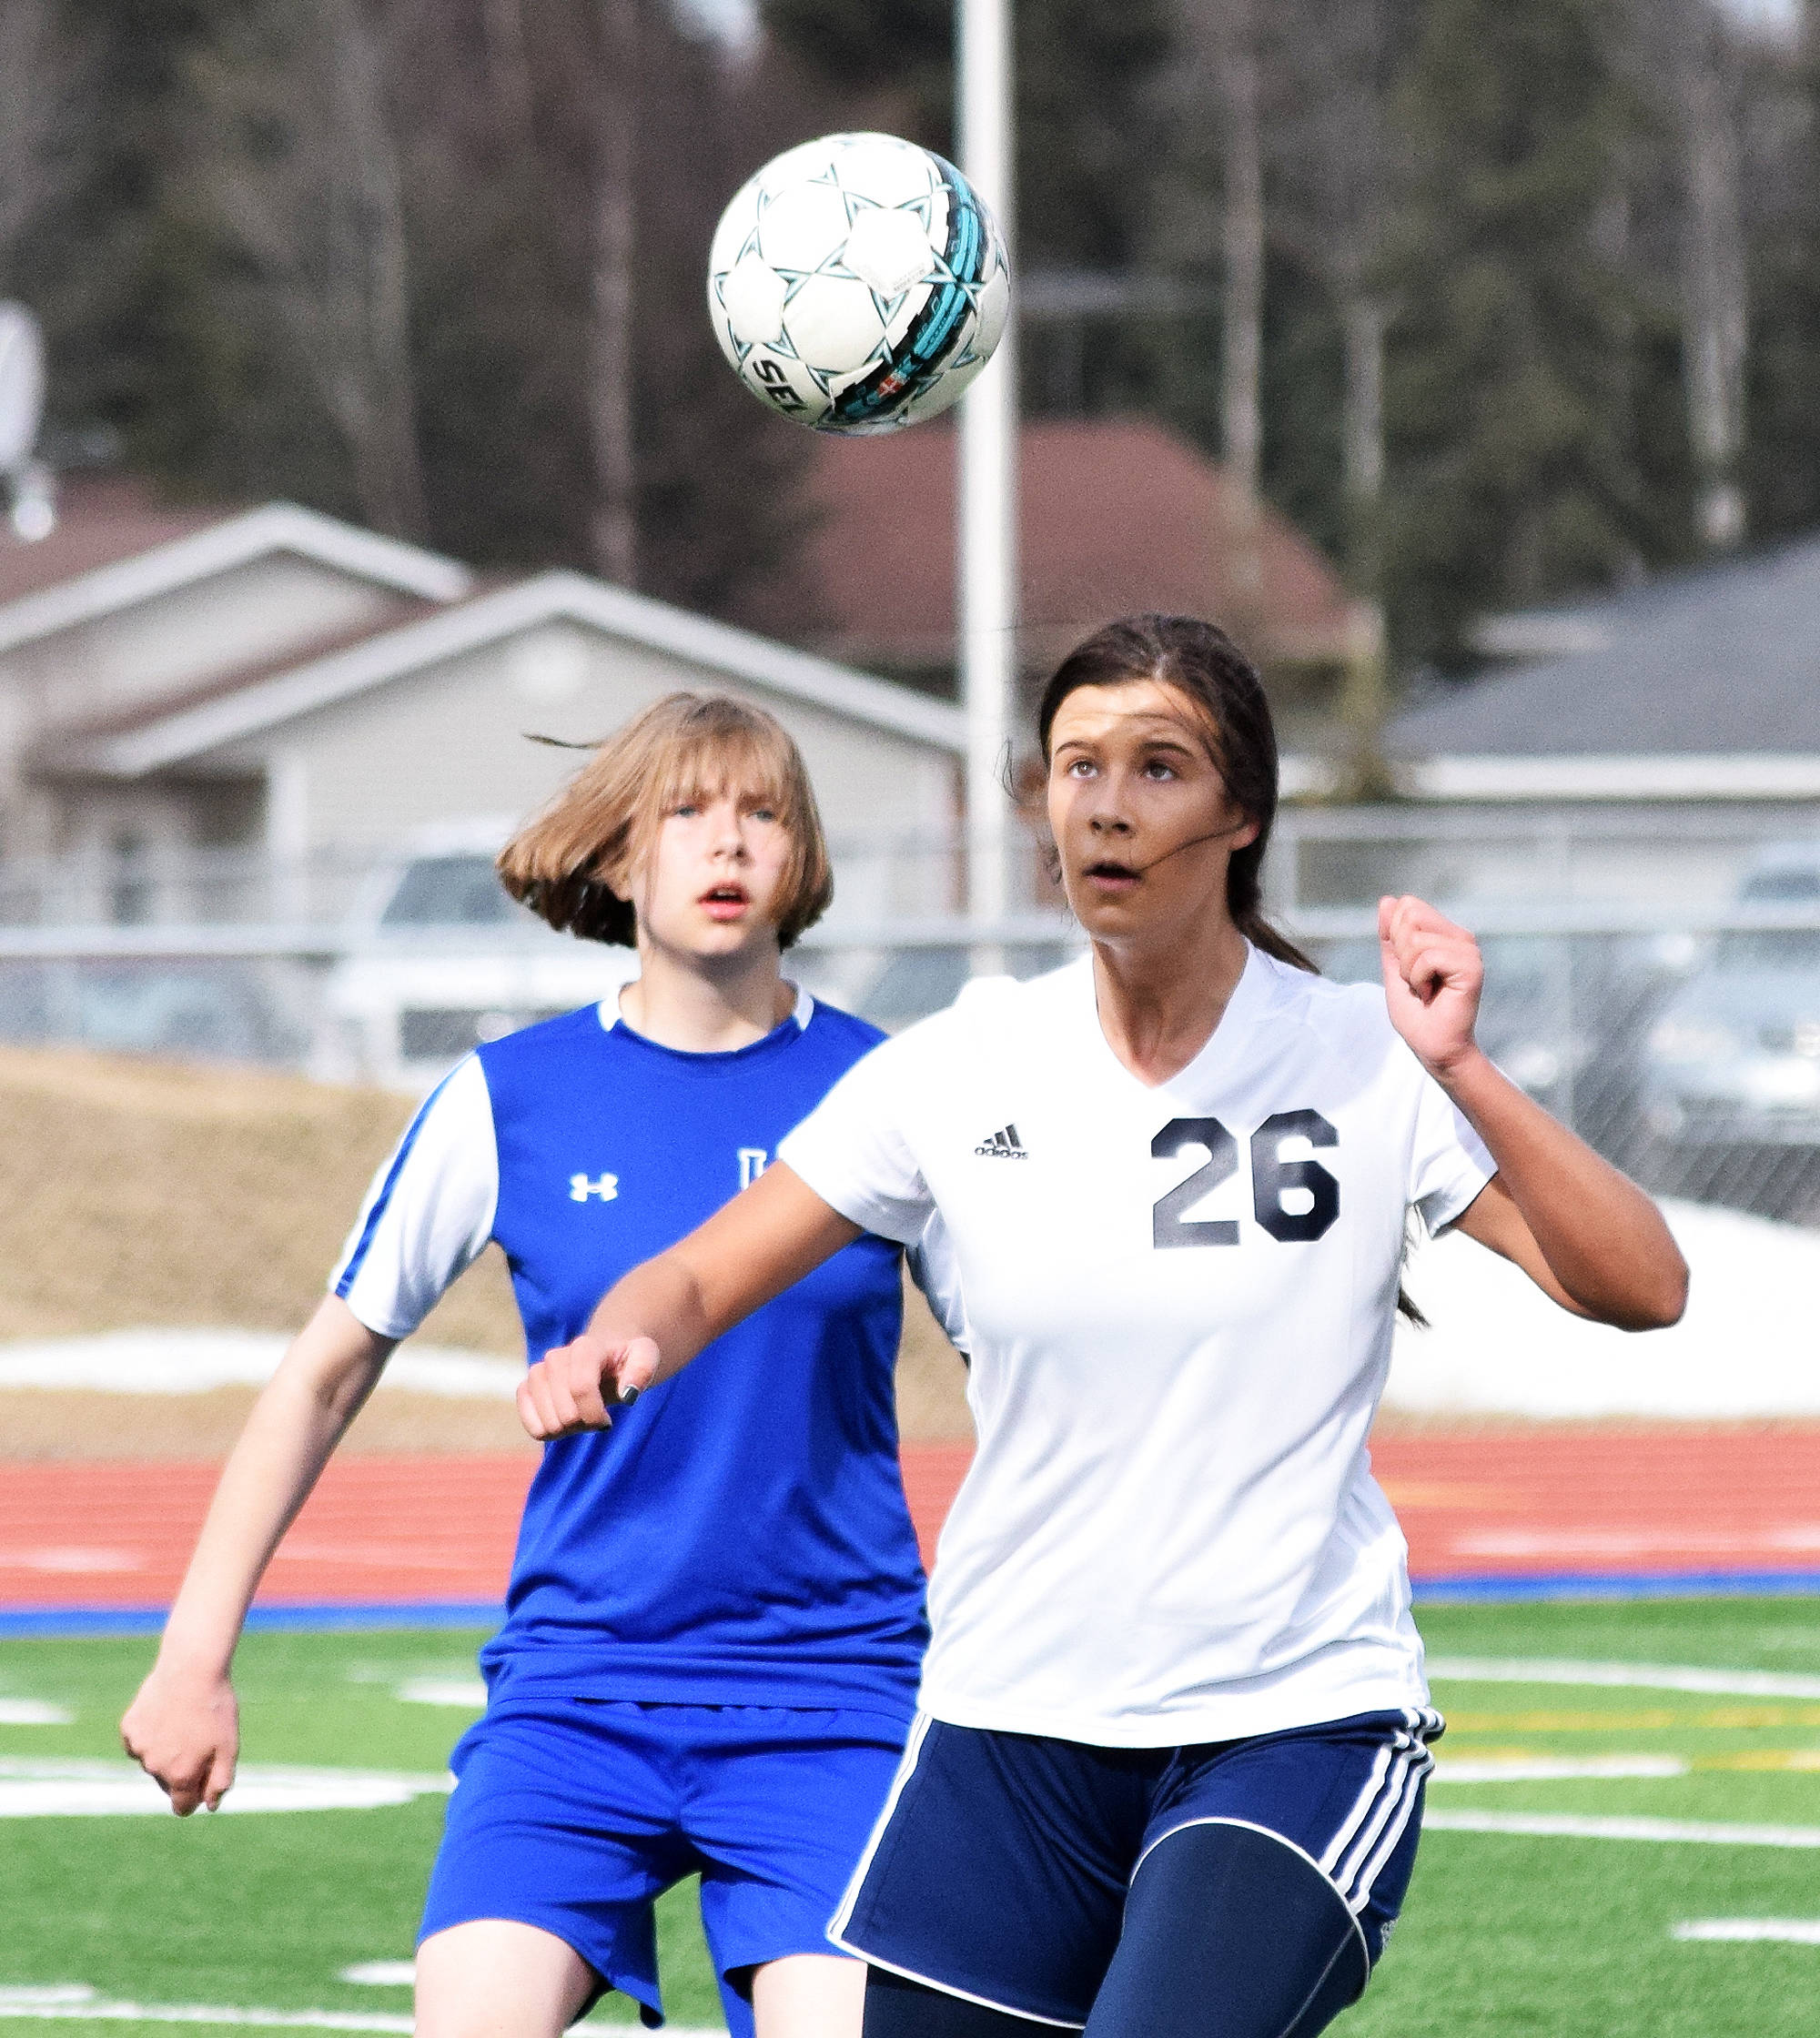 Soldotna’s Whitney Wortham heads the ball in front of Kodiak’s Cassie Scherler April 22, 2017, at Justin Maile Field in Soldotna (Photo by Joey Klecka/Peninsula Clarion)